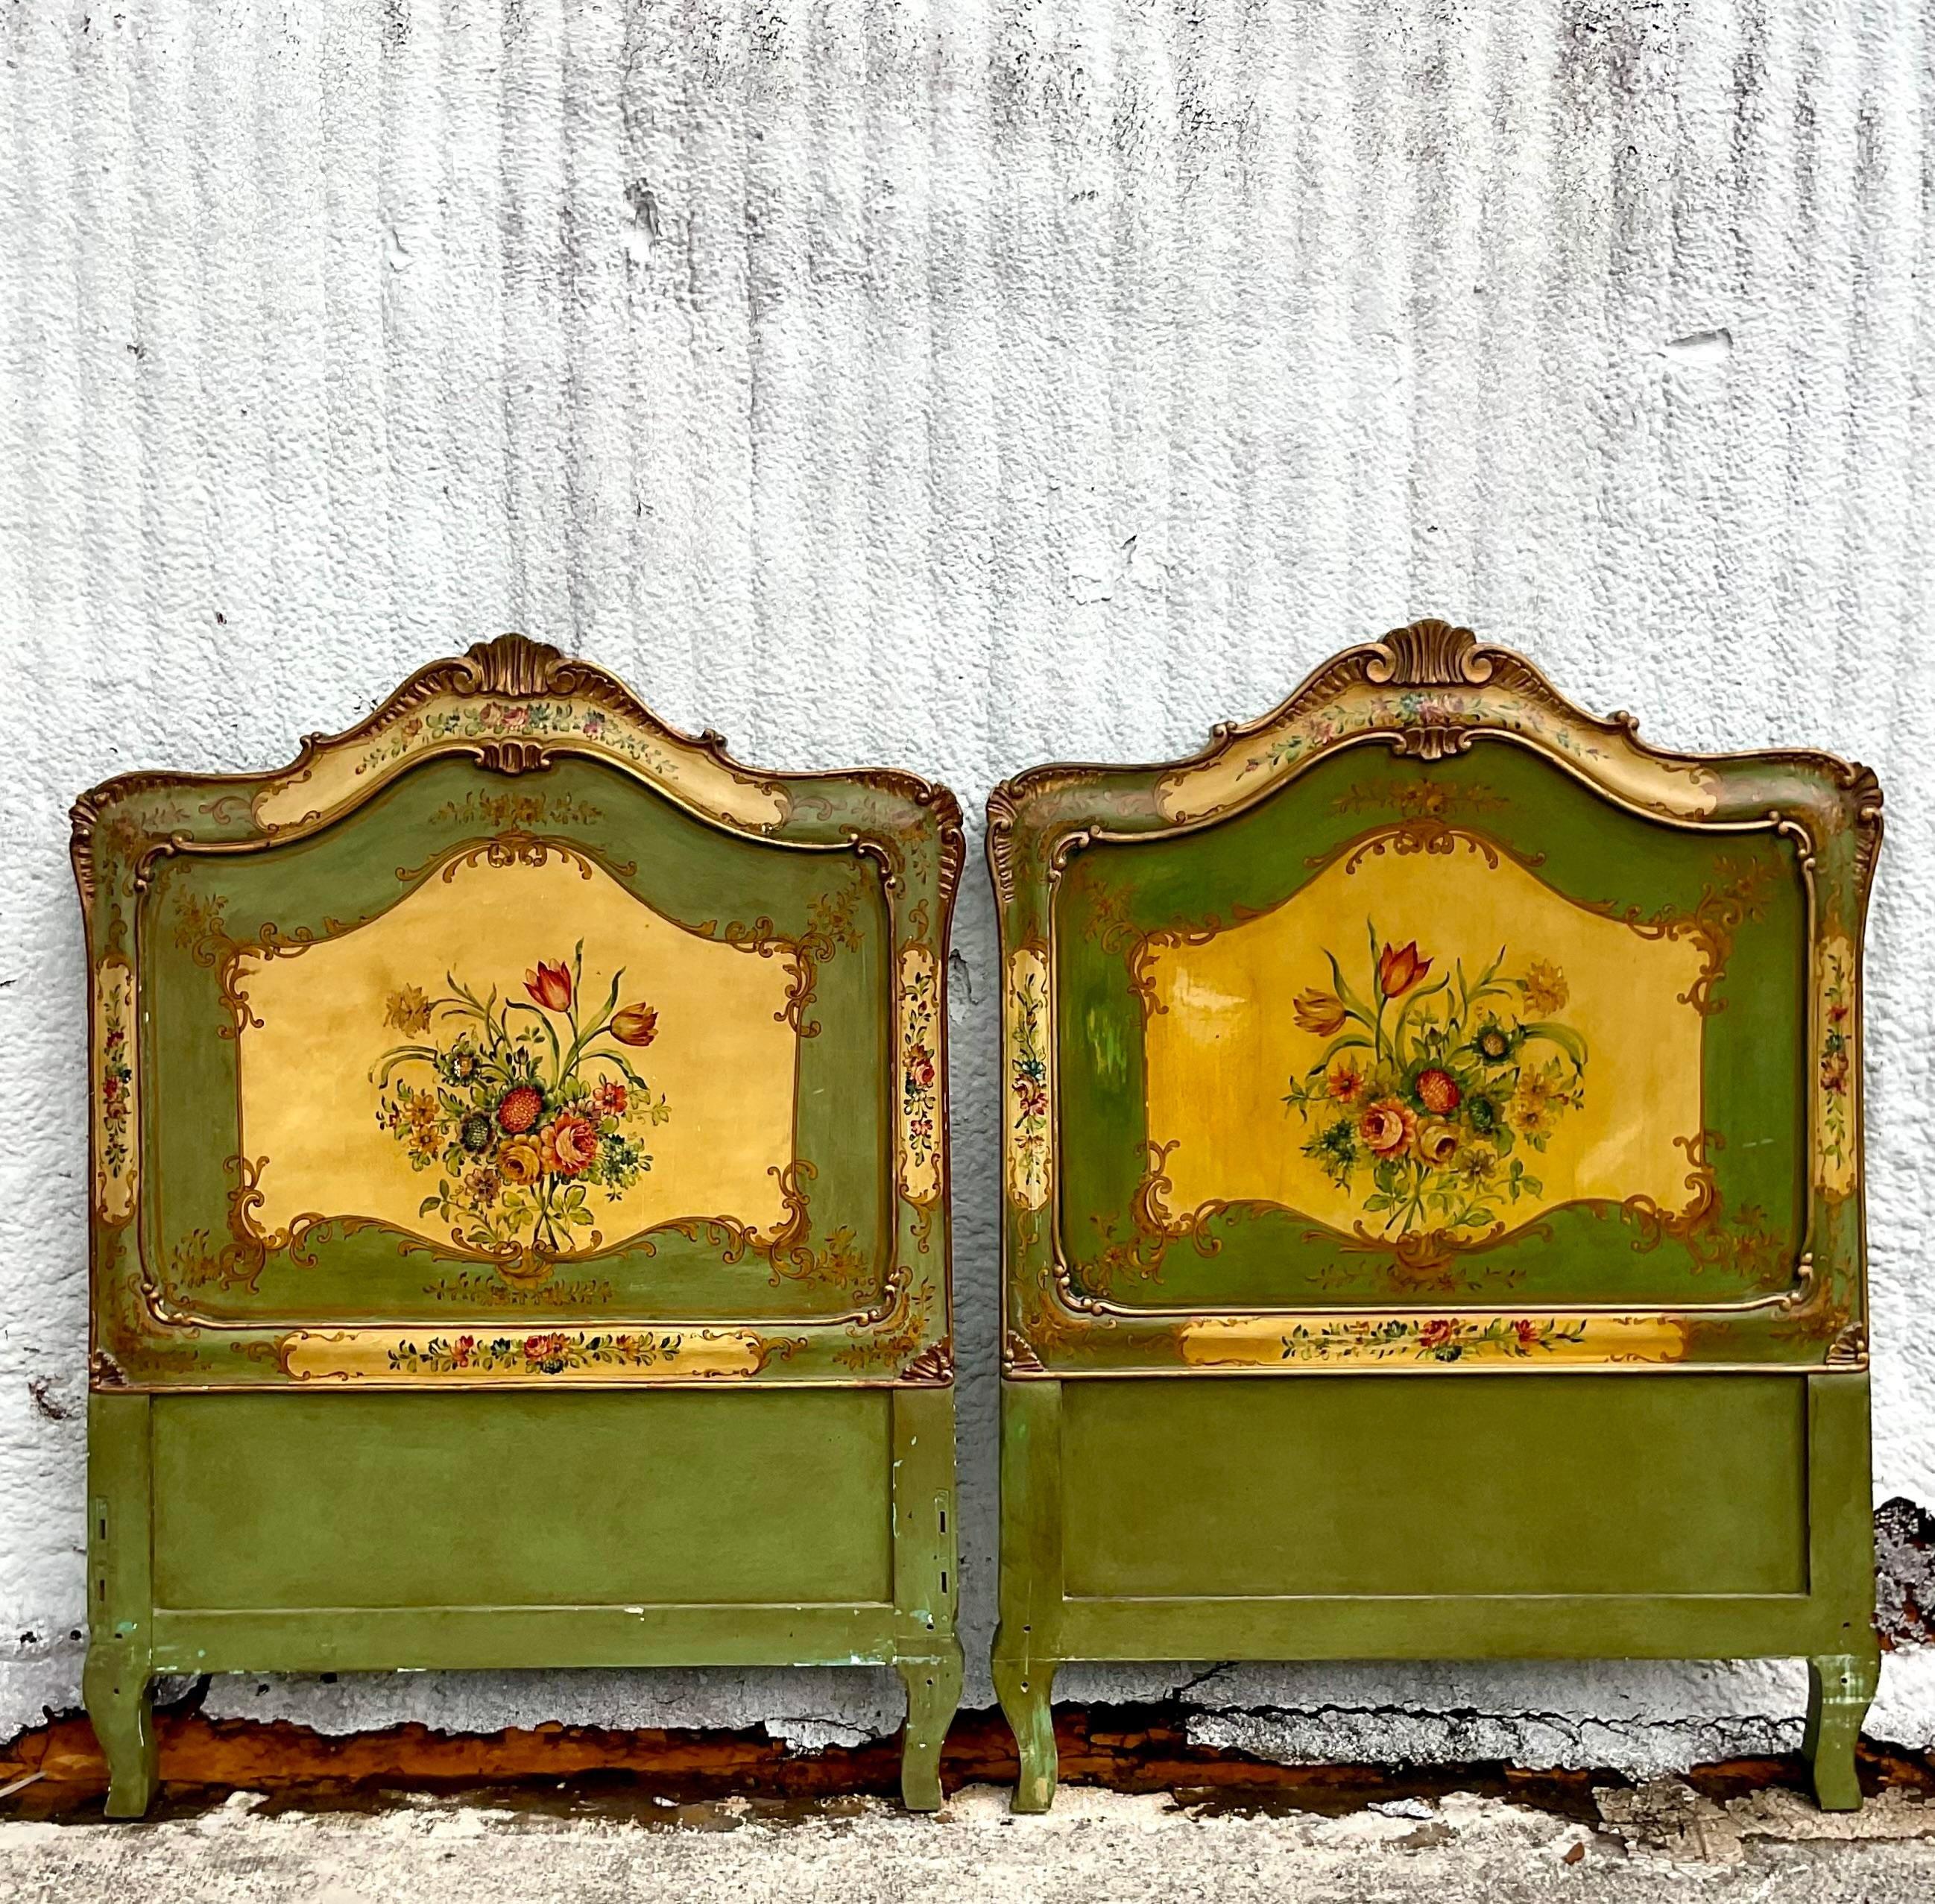 Vintage Italian Hand Painted Floral Twin Headboards - a Pair In Good Condition For Sale In west palm beach, FL